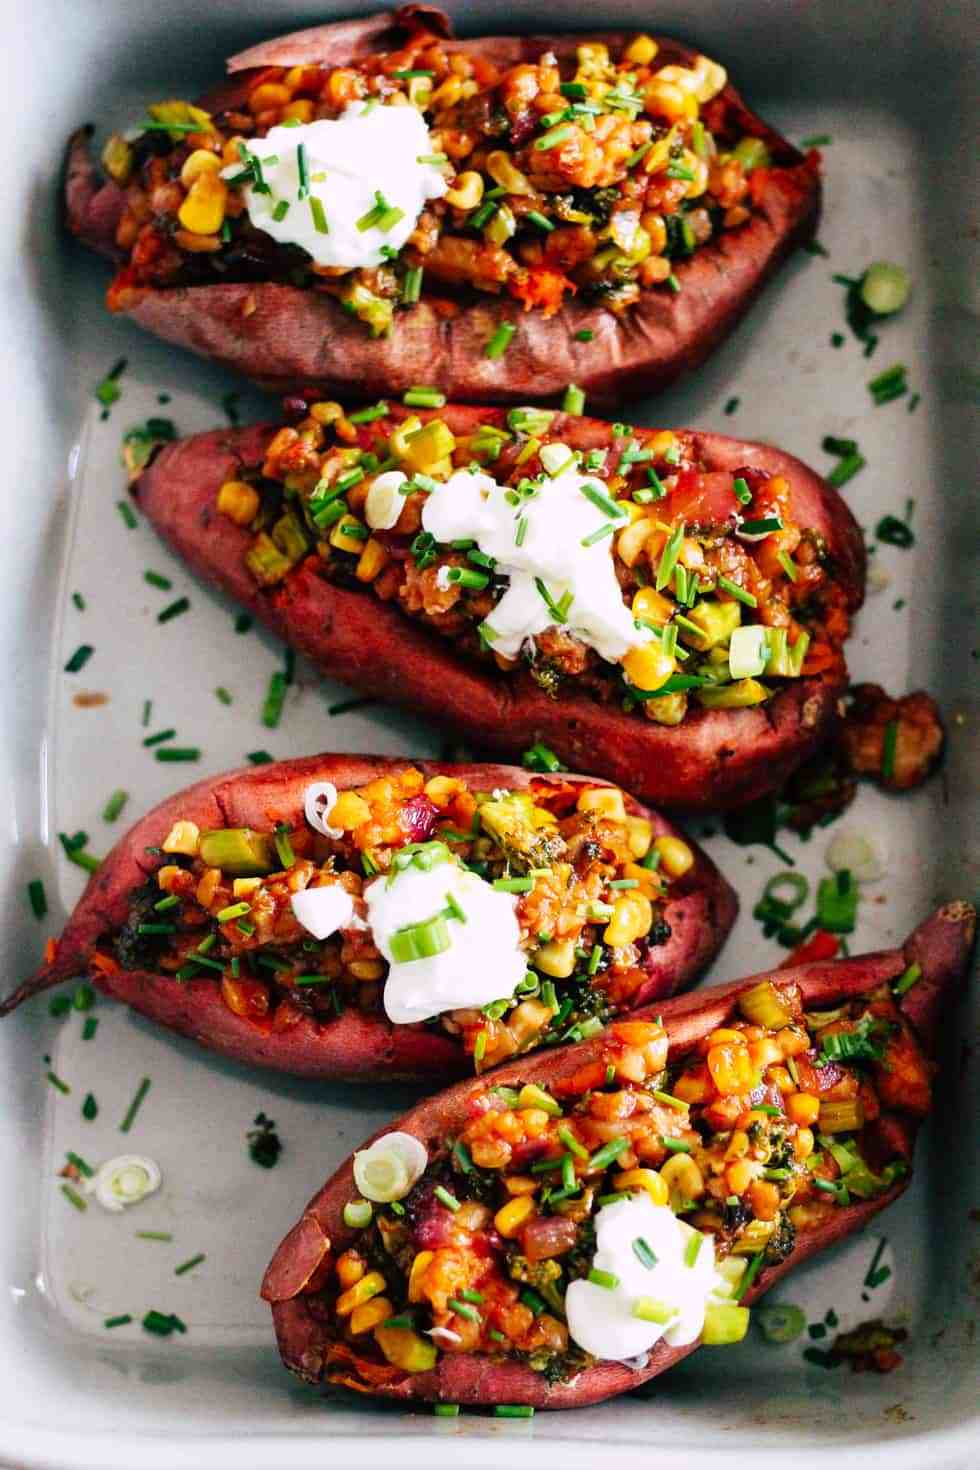 Easy College Meals include loaded sweet potatoes topped with yogurt and herbs.